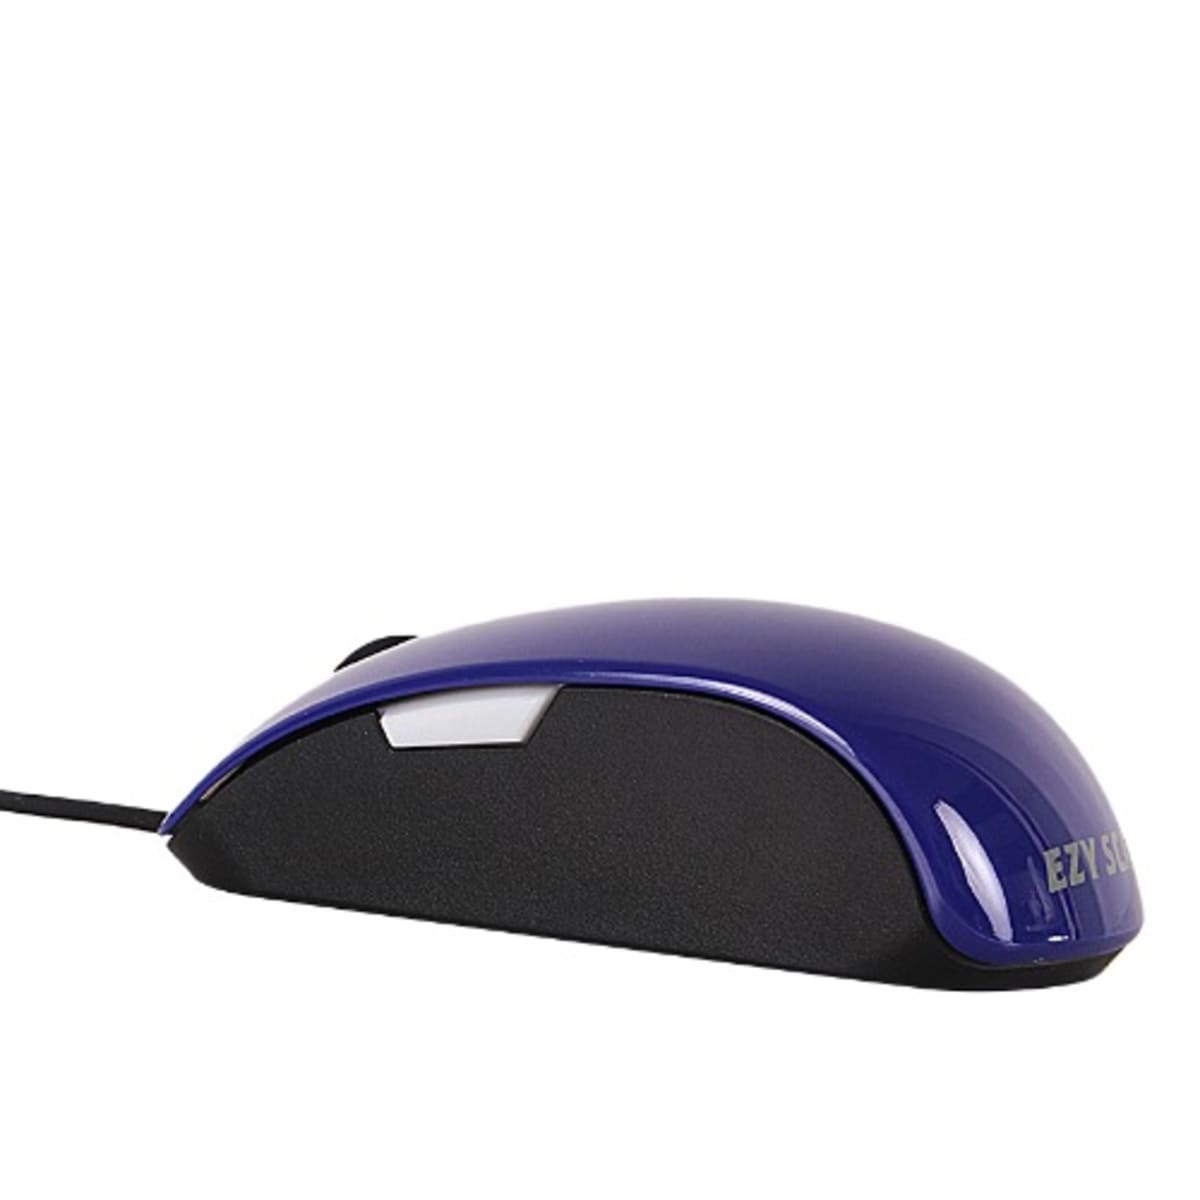  IRIScan Portable Scanning Mouse : Electronics